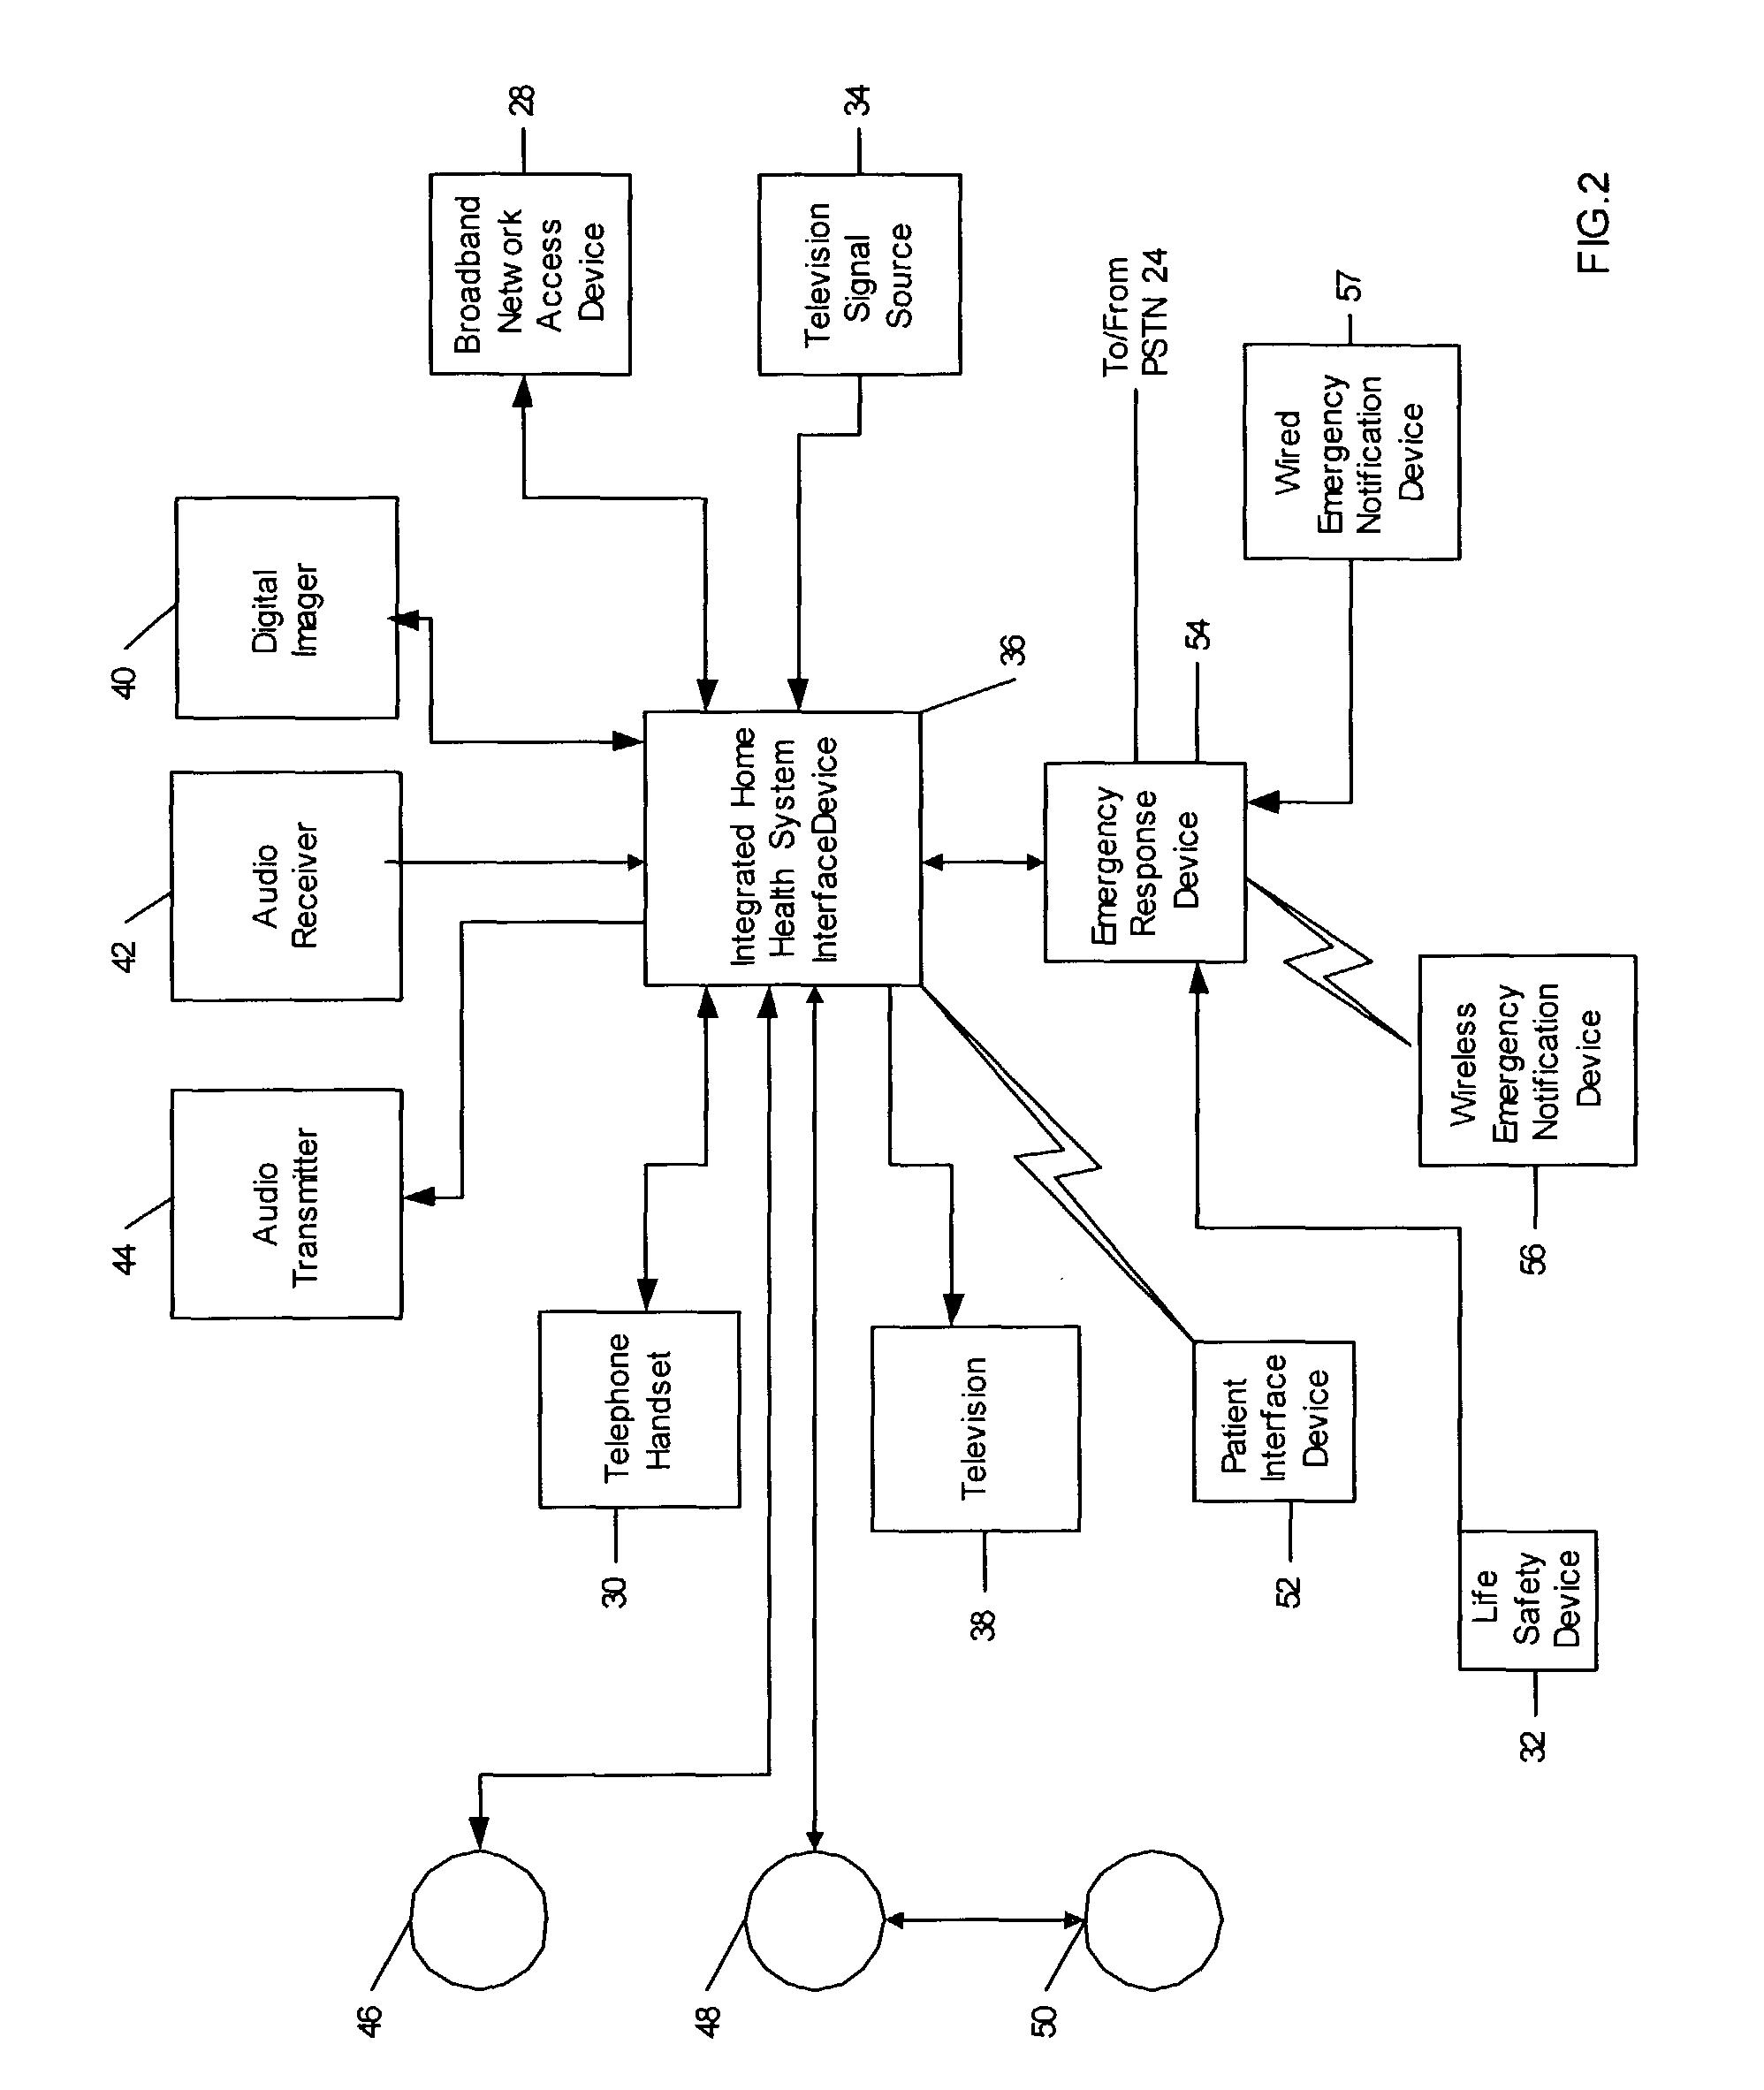 Method for conducting a home health session using an integrated television-based broadband home health system